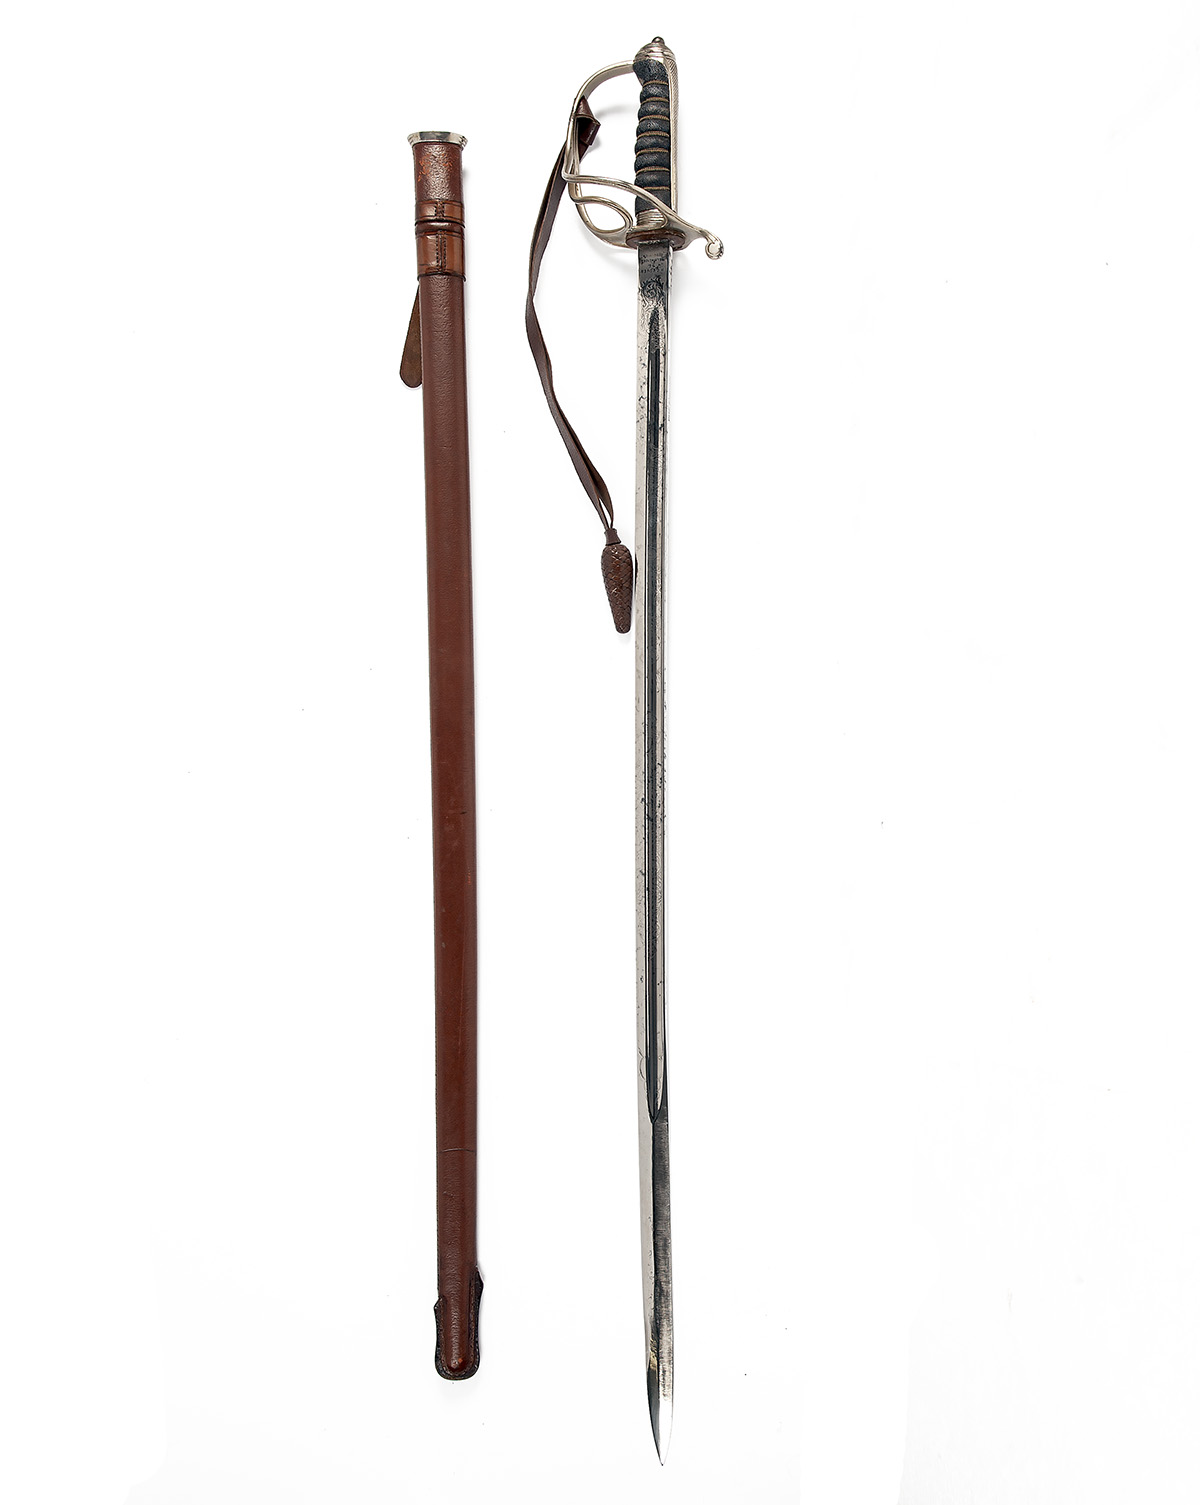 R. GROVES, WOOLWICH A BRITISH 1821 ARTILLERY OFFICER'S SWORD, circa World War One, with slightly